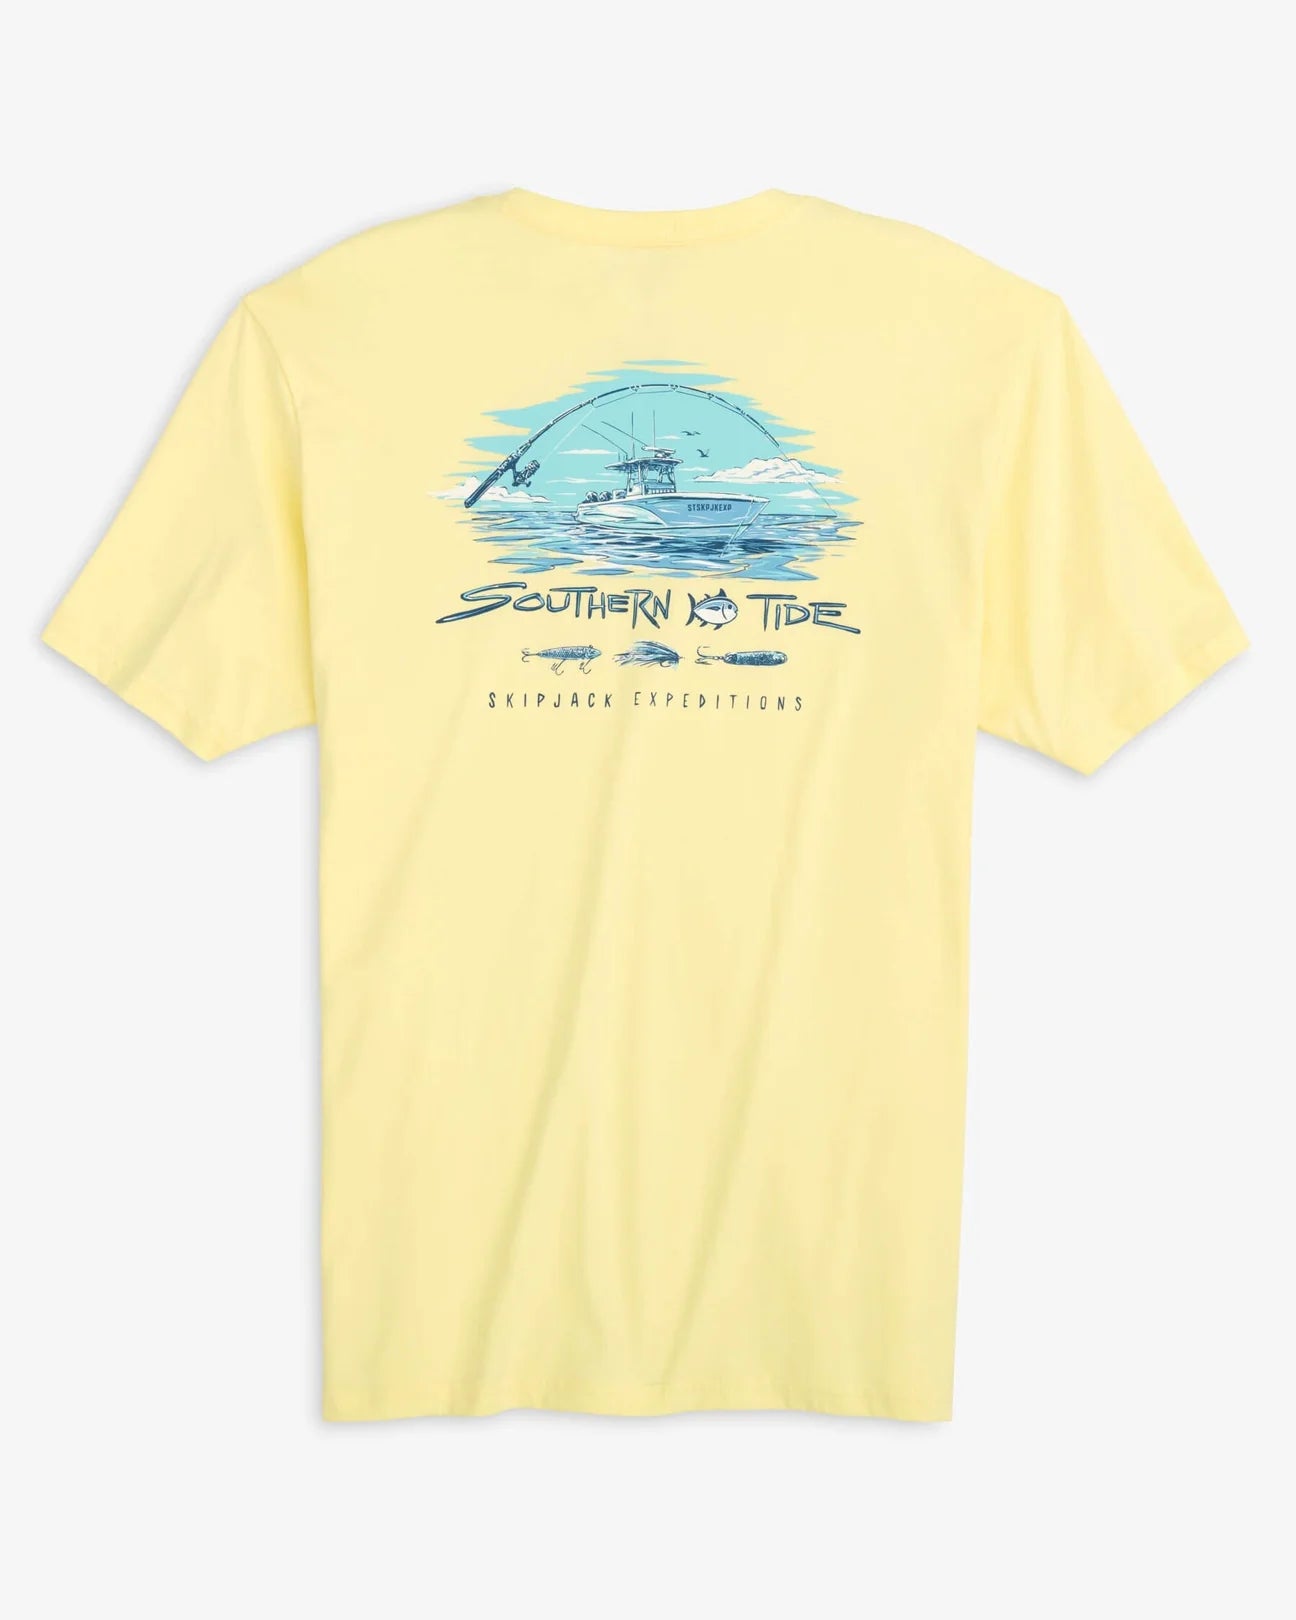 SOUTHERN TIDE Men's Tees Southern Tide Skipjack Expeditions T-Shirt || David's Clothing